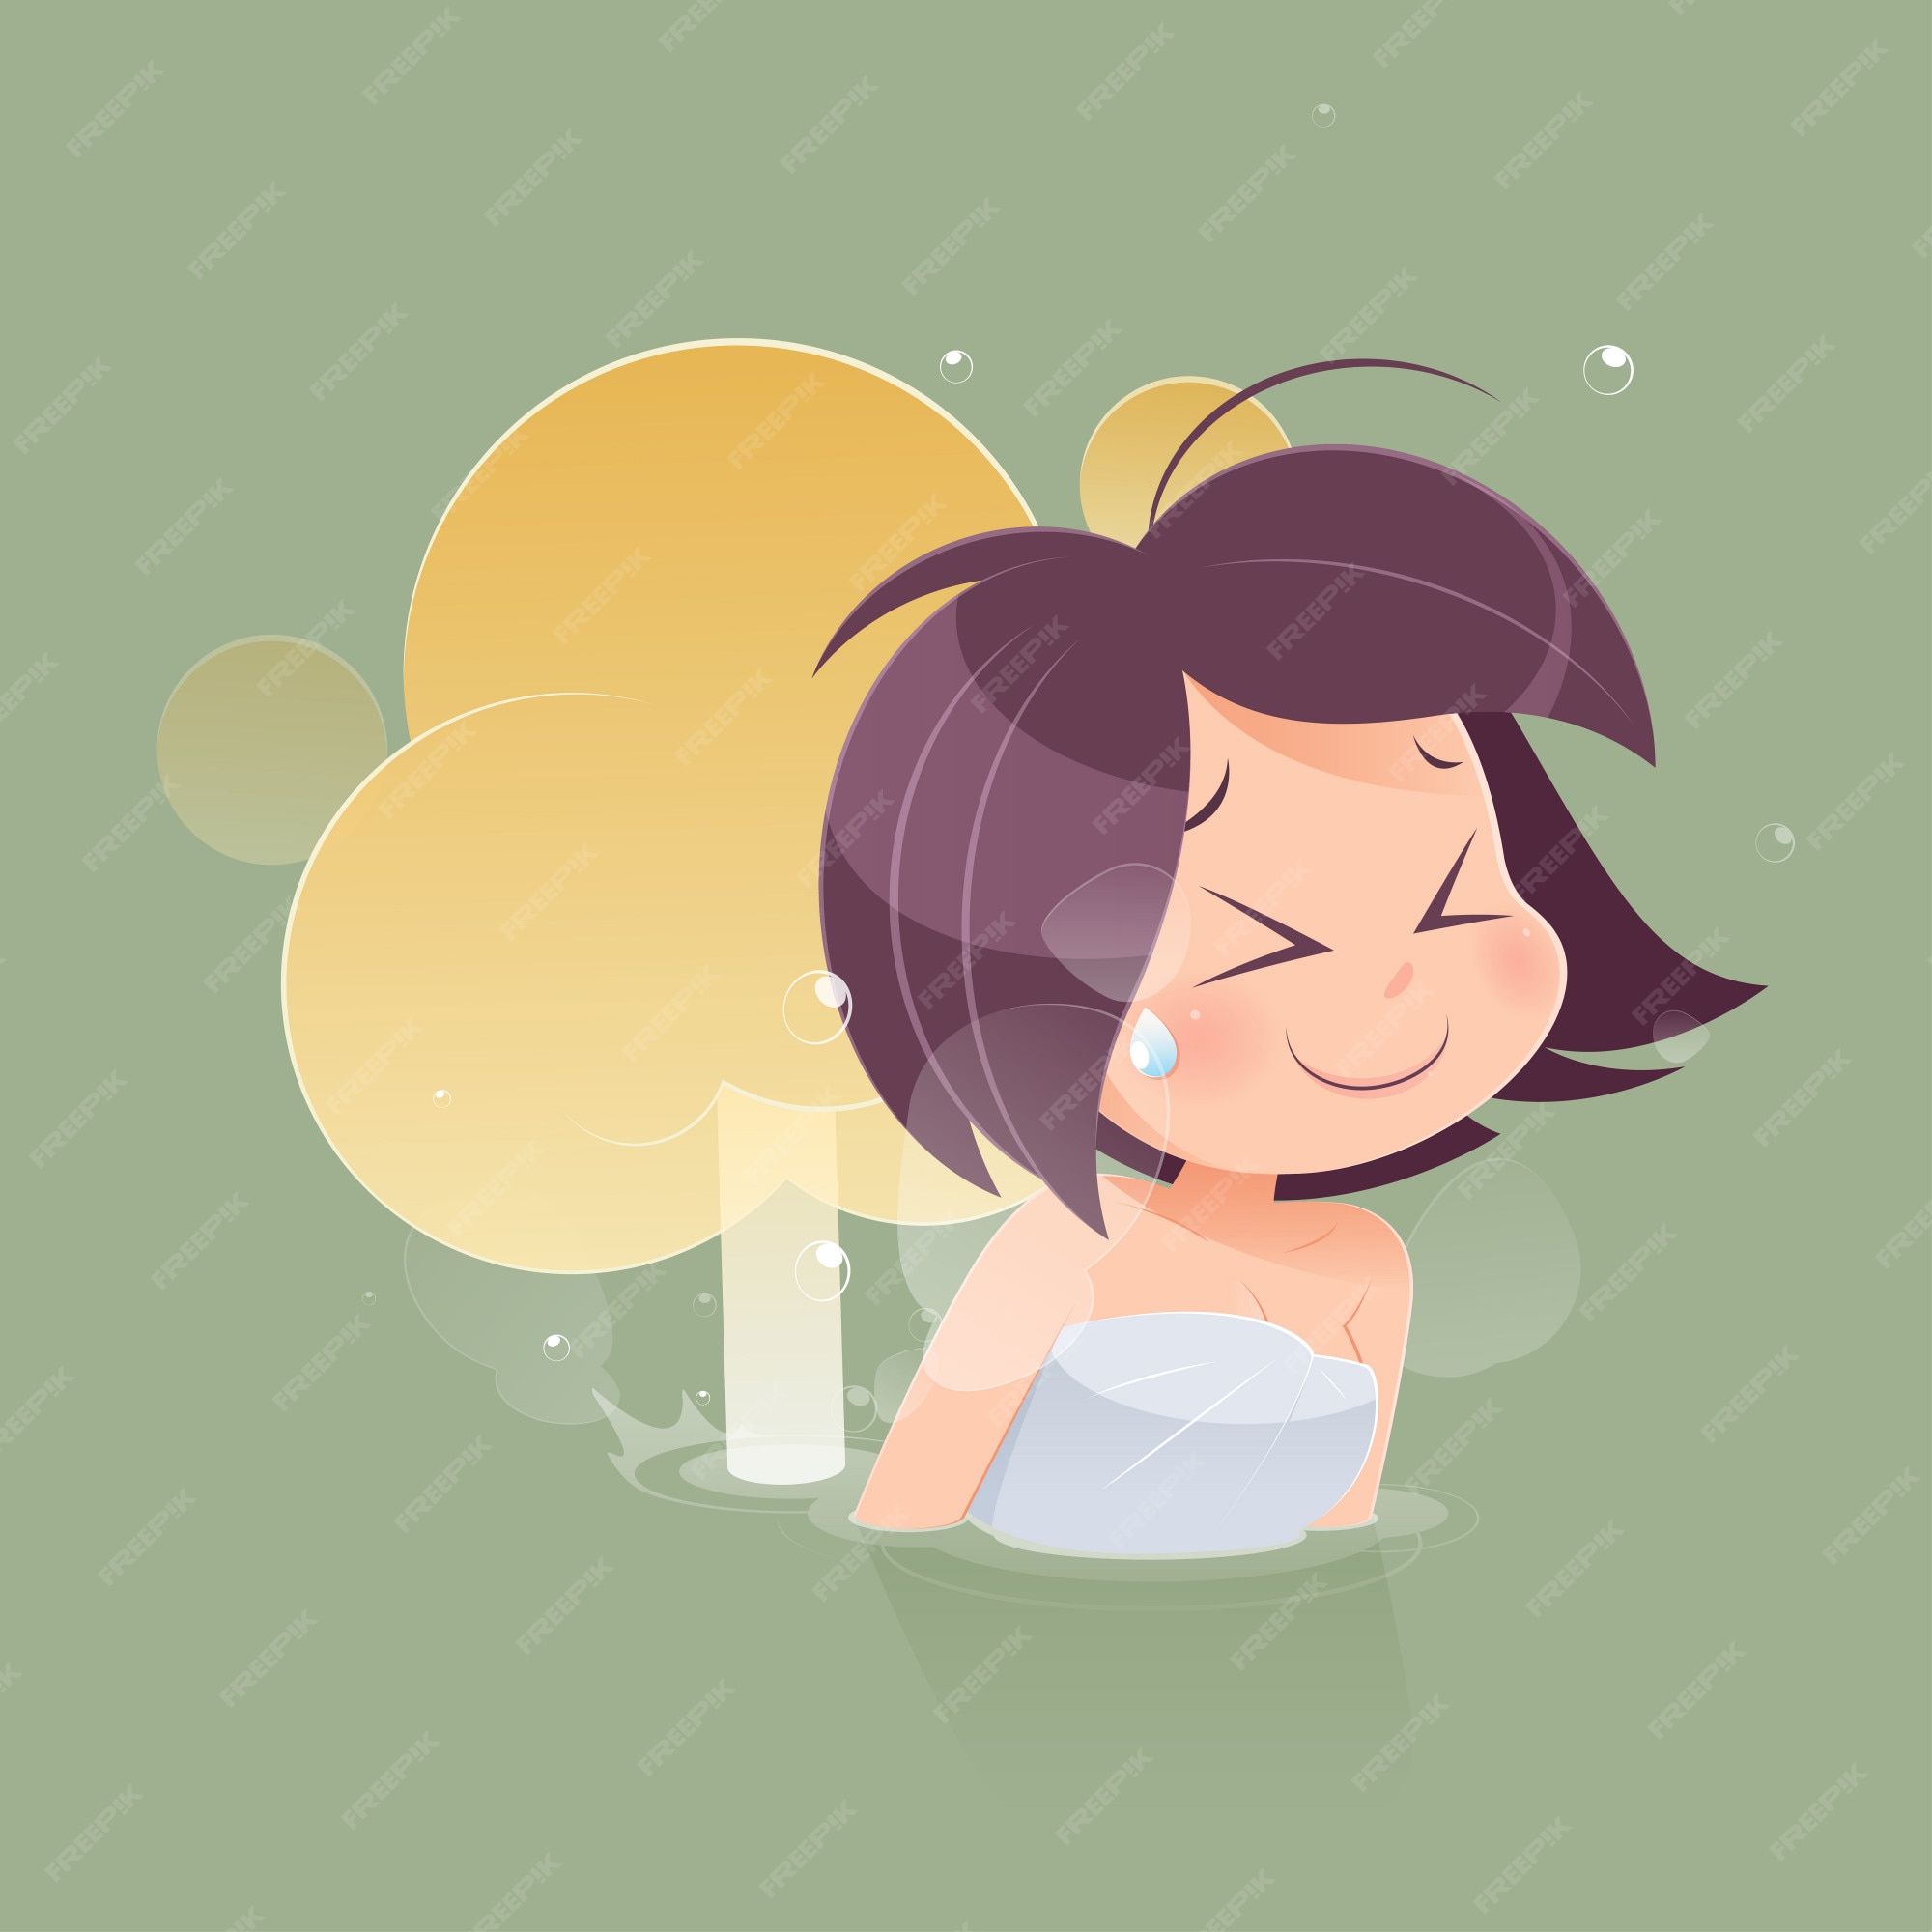 Premium Vector | Cute woman farting with blank balloon out from her bottom  against green background, funny face cartoon